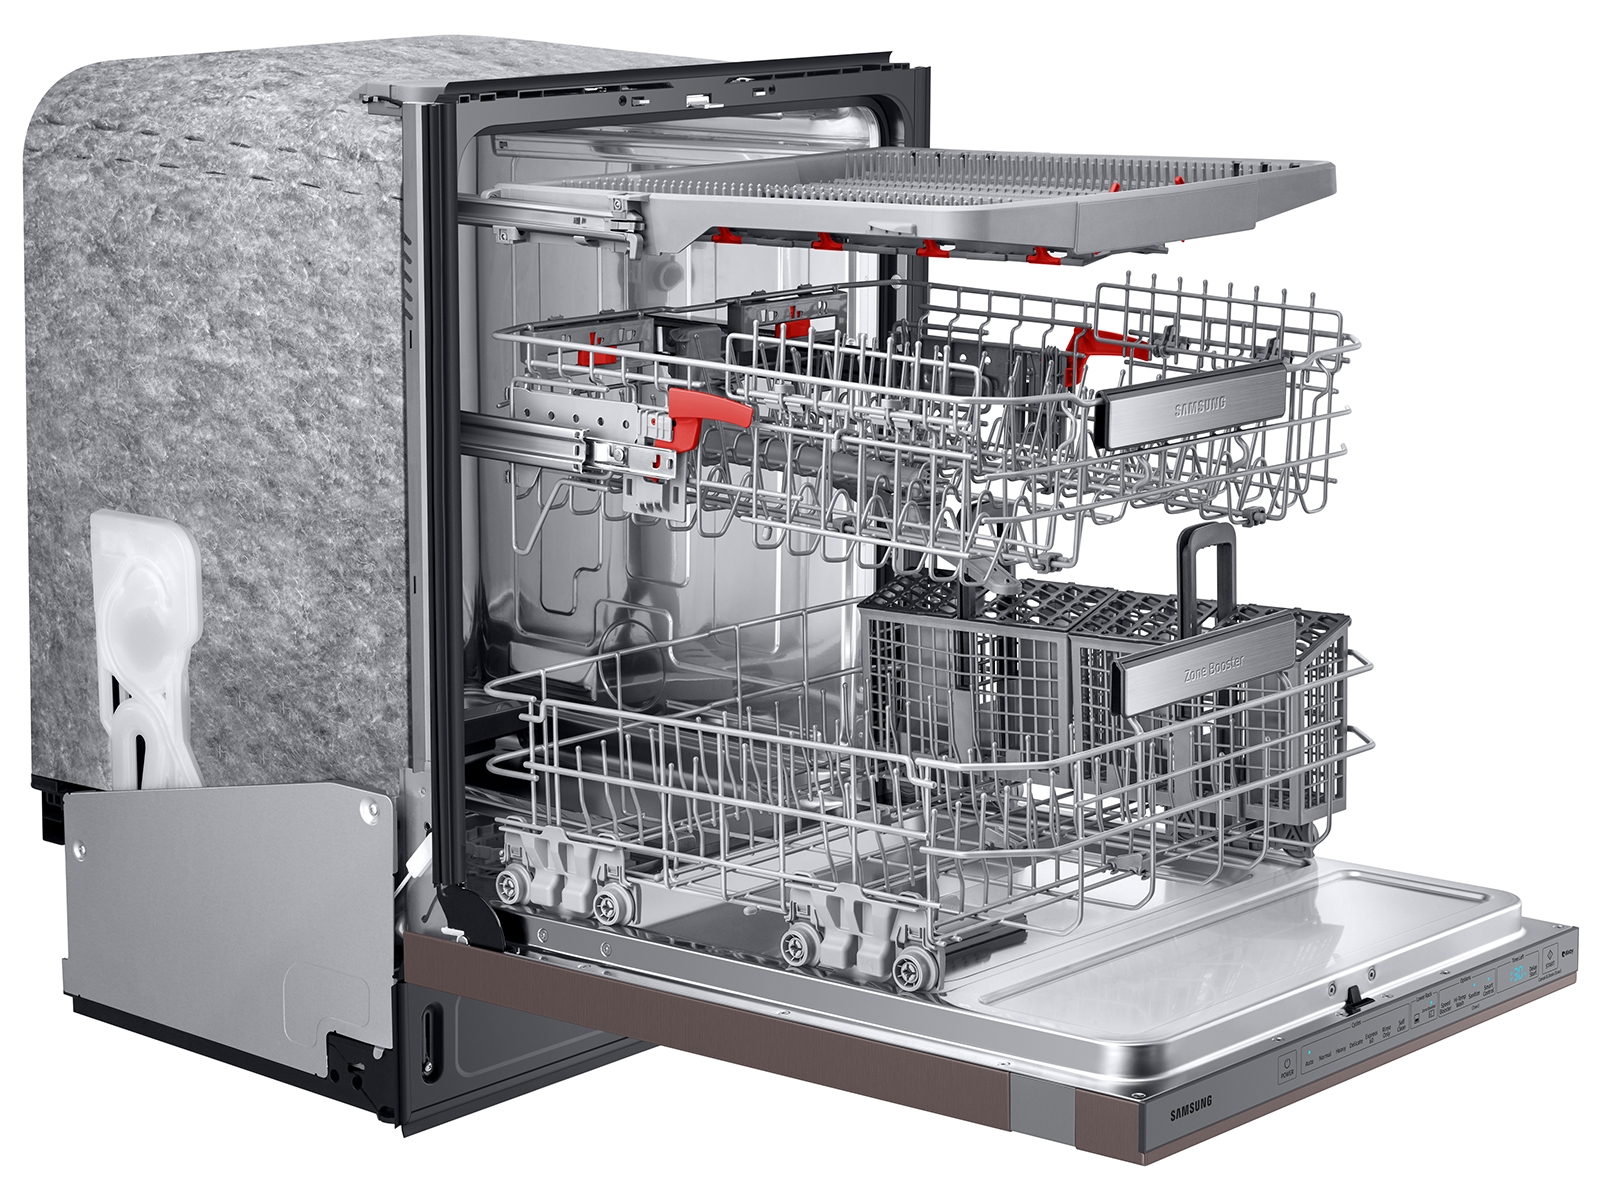 4 Common Samsung Dishwasher Problems (and Solutions) - Ocean Appliance